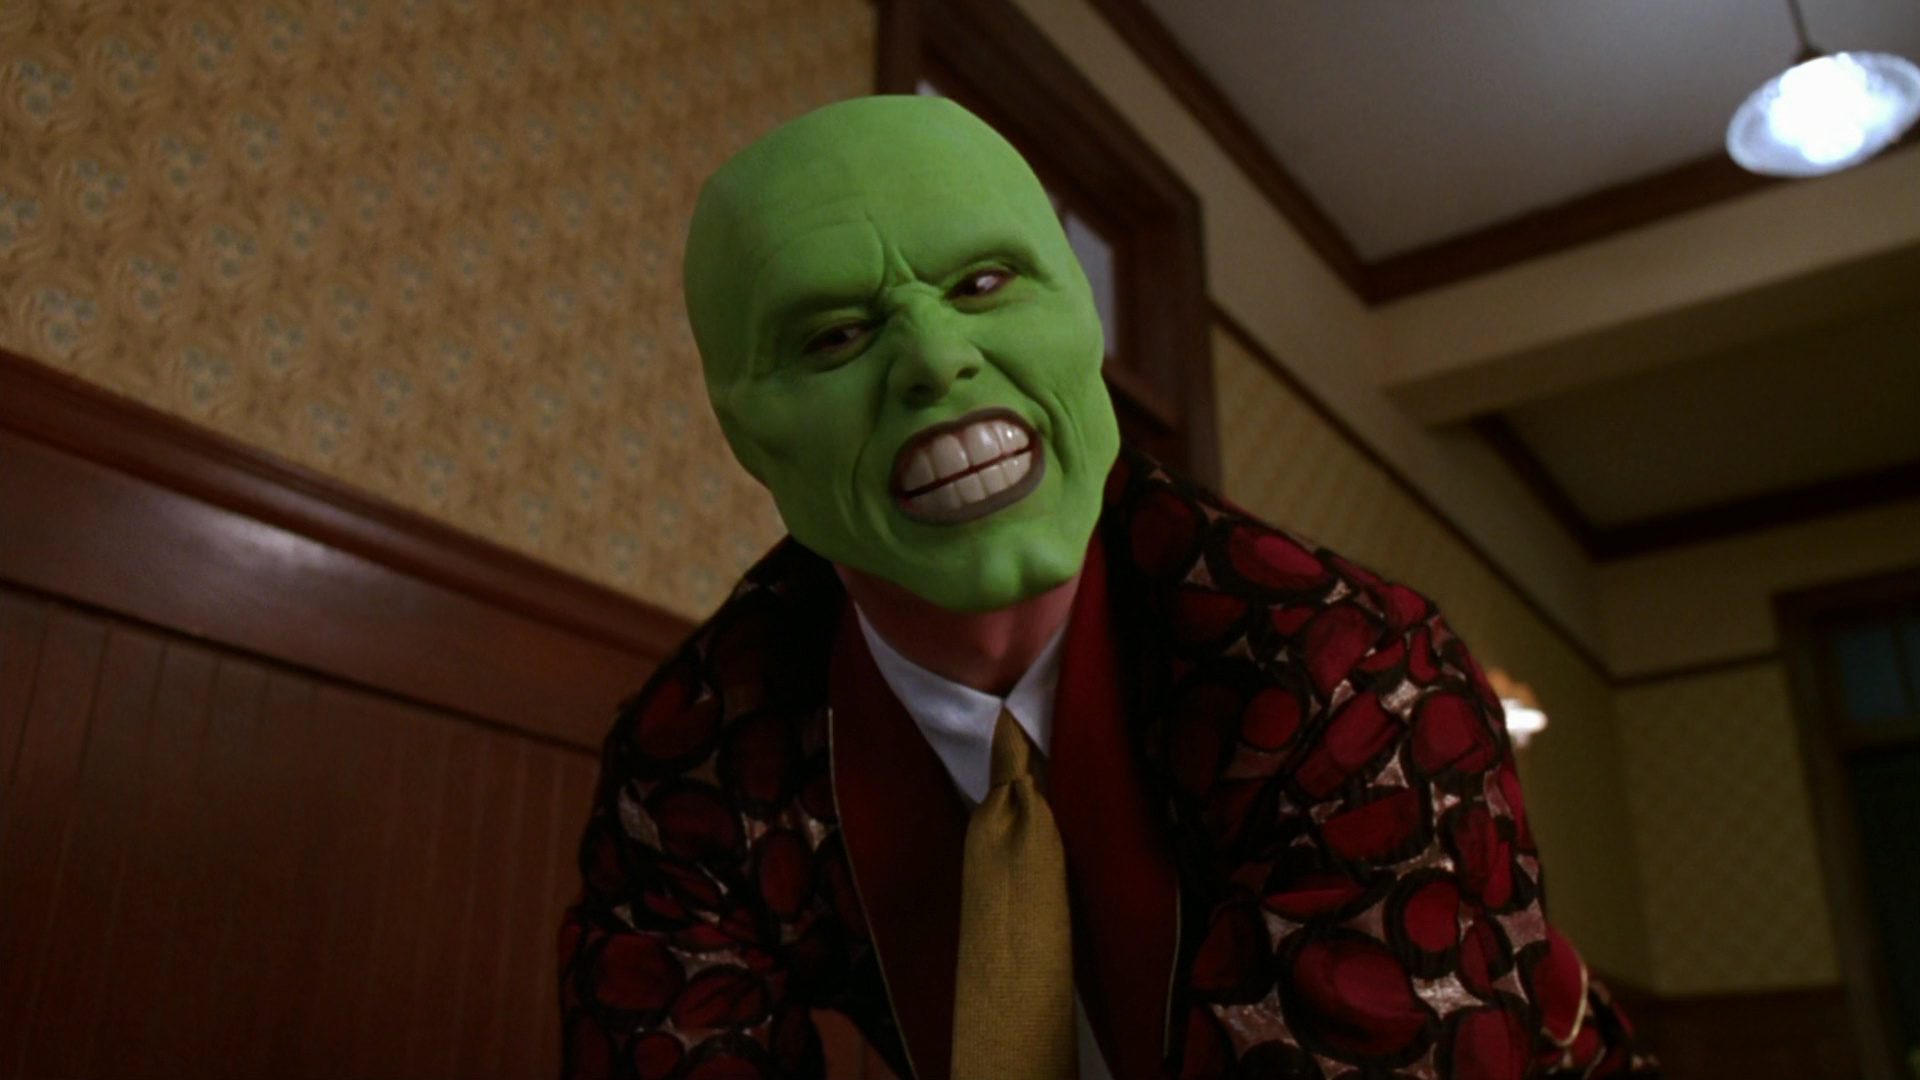 Jim Carrey, Celebrity photo, The Mask film, Actor's picture, 1920x1080 Full HD Desktop